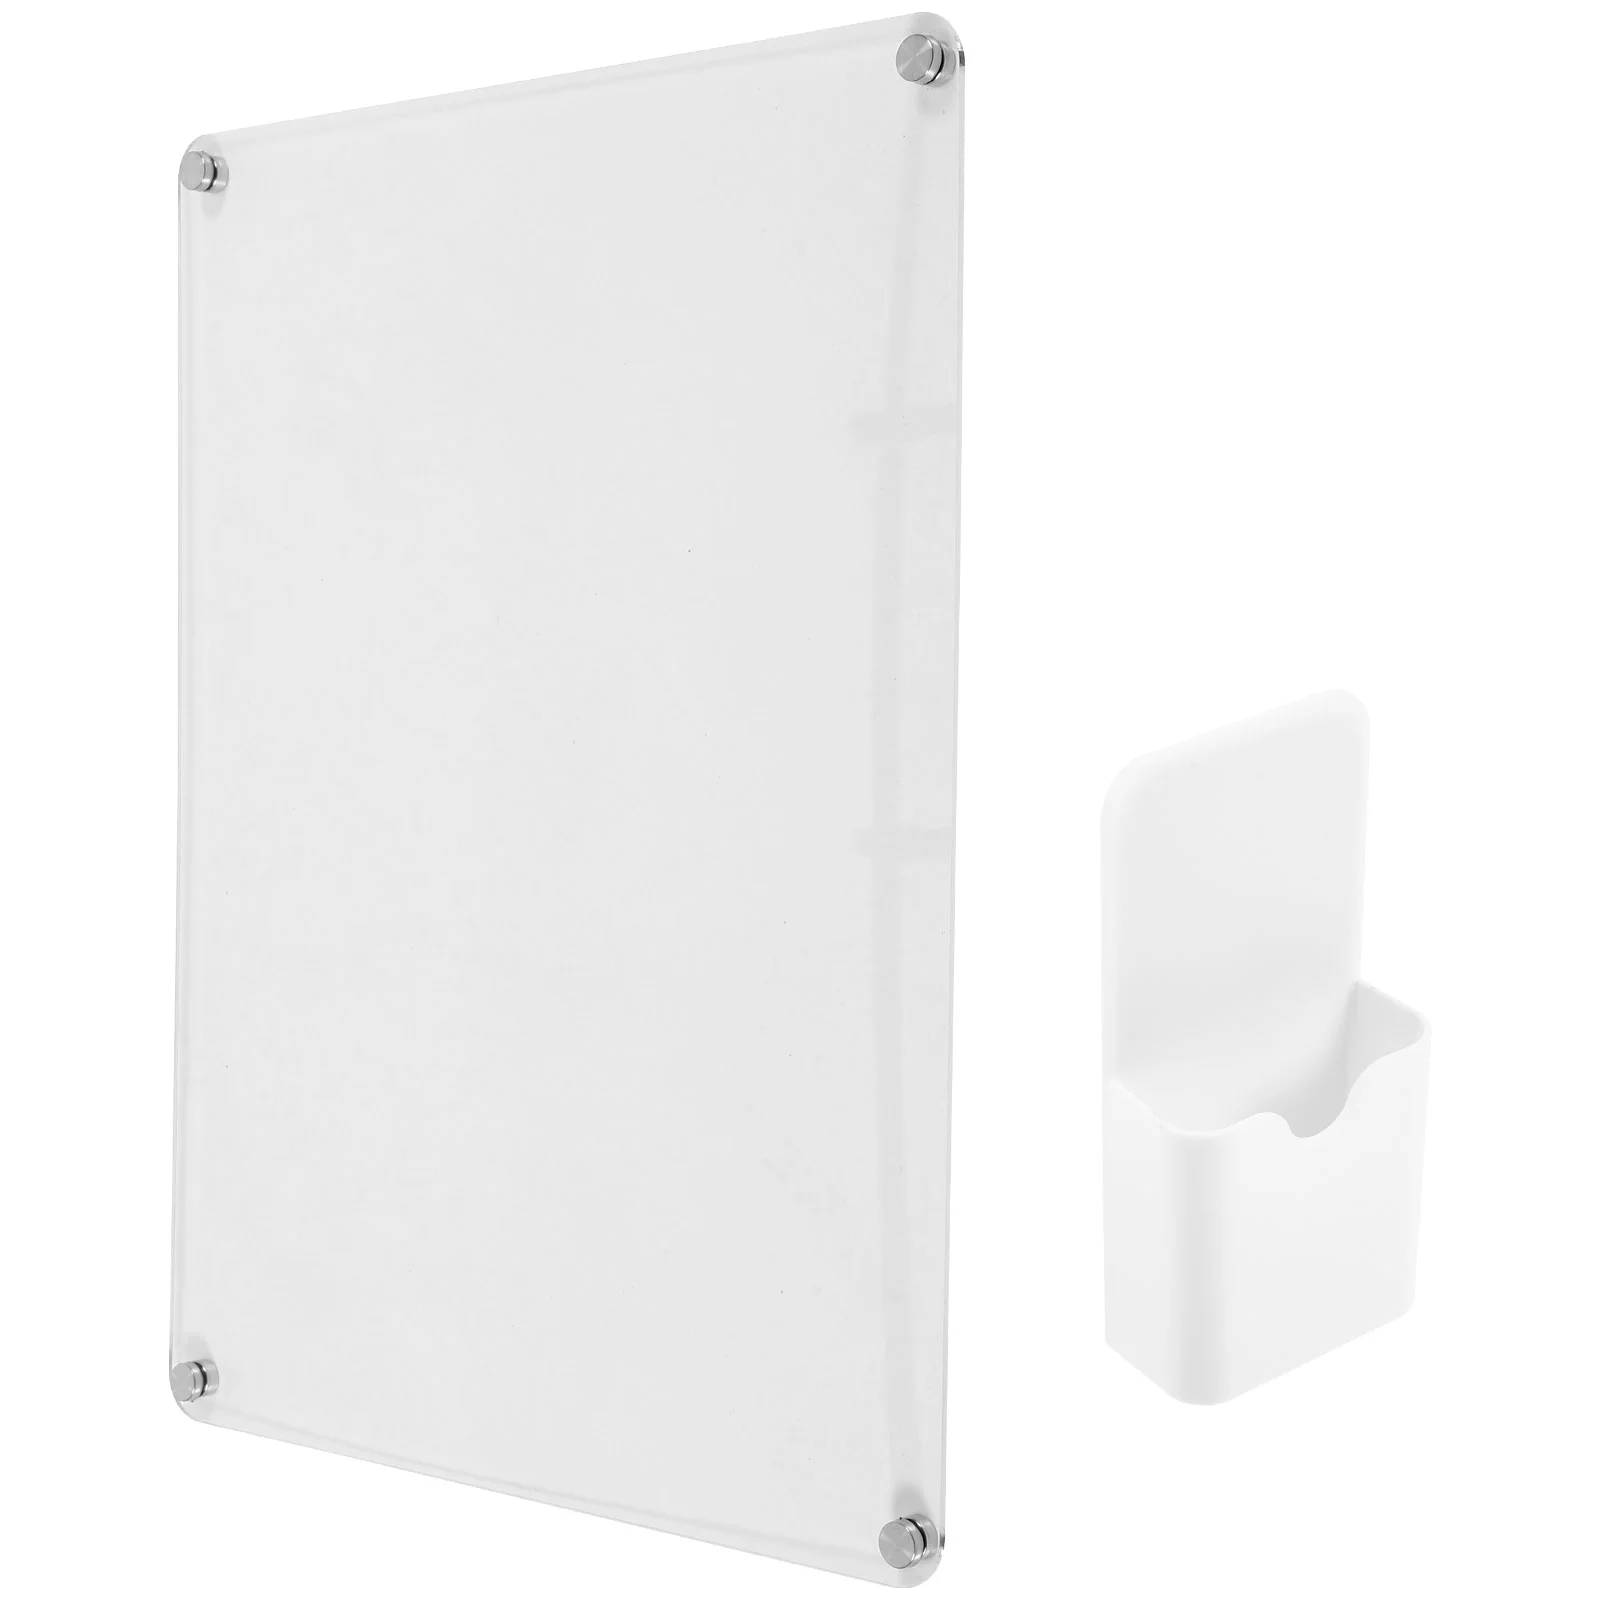 

Refrigerator Message Board Planner The Wall Display Magnetic Do List Fridge Writing Reminder Small Dry Erase Boards